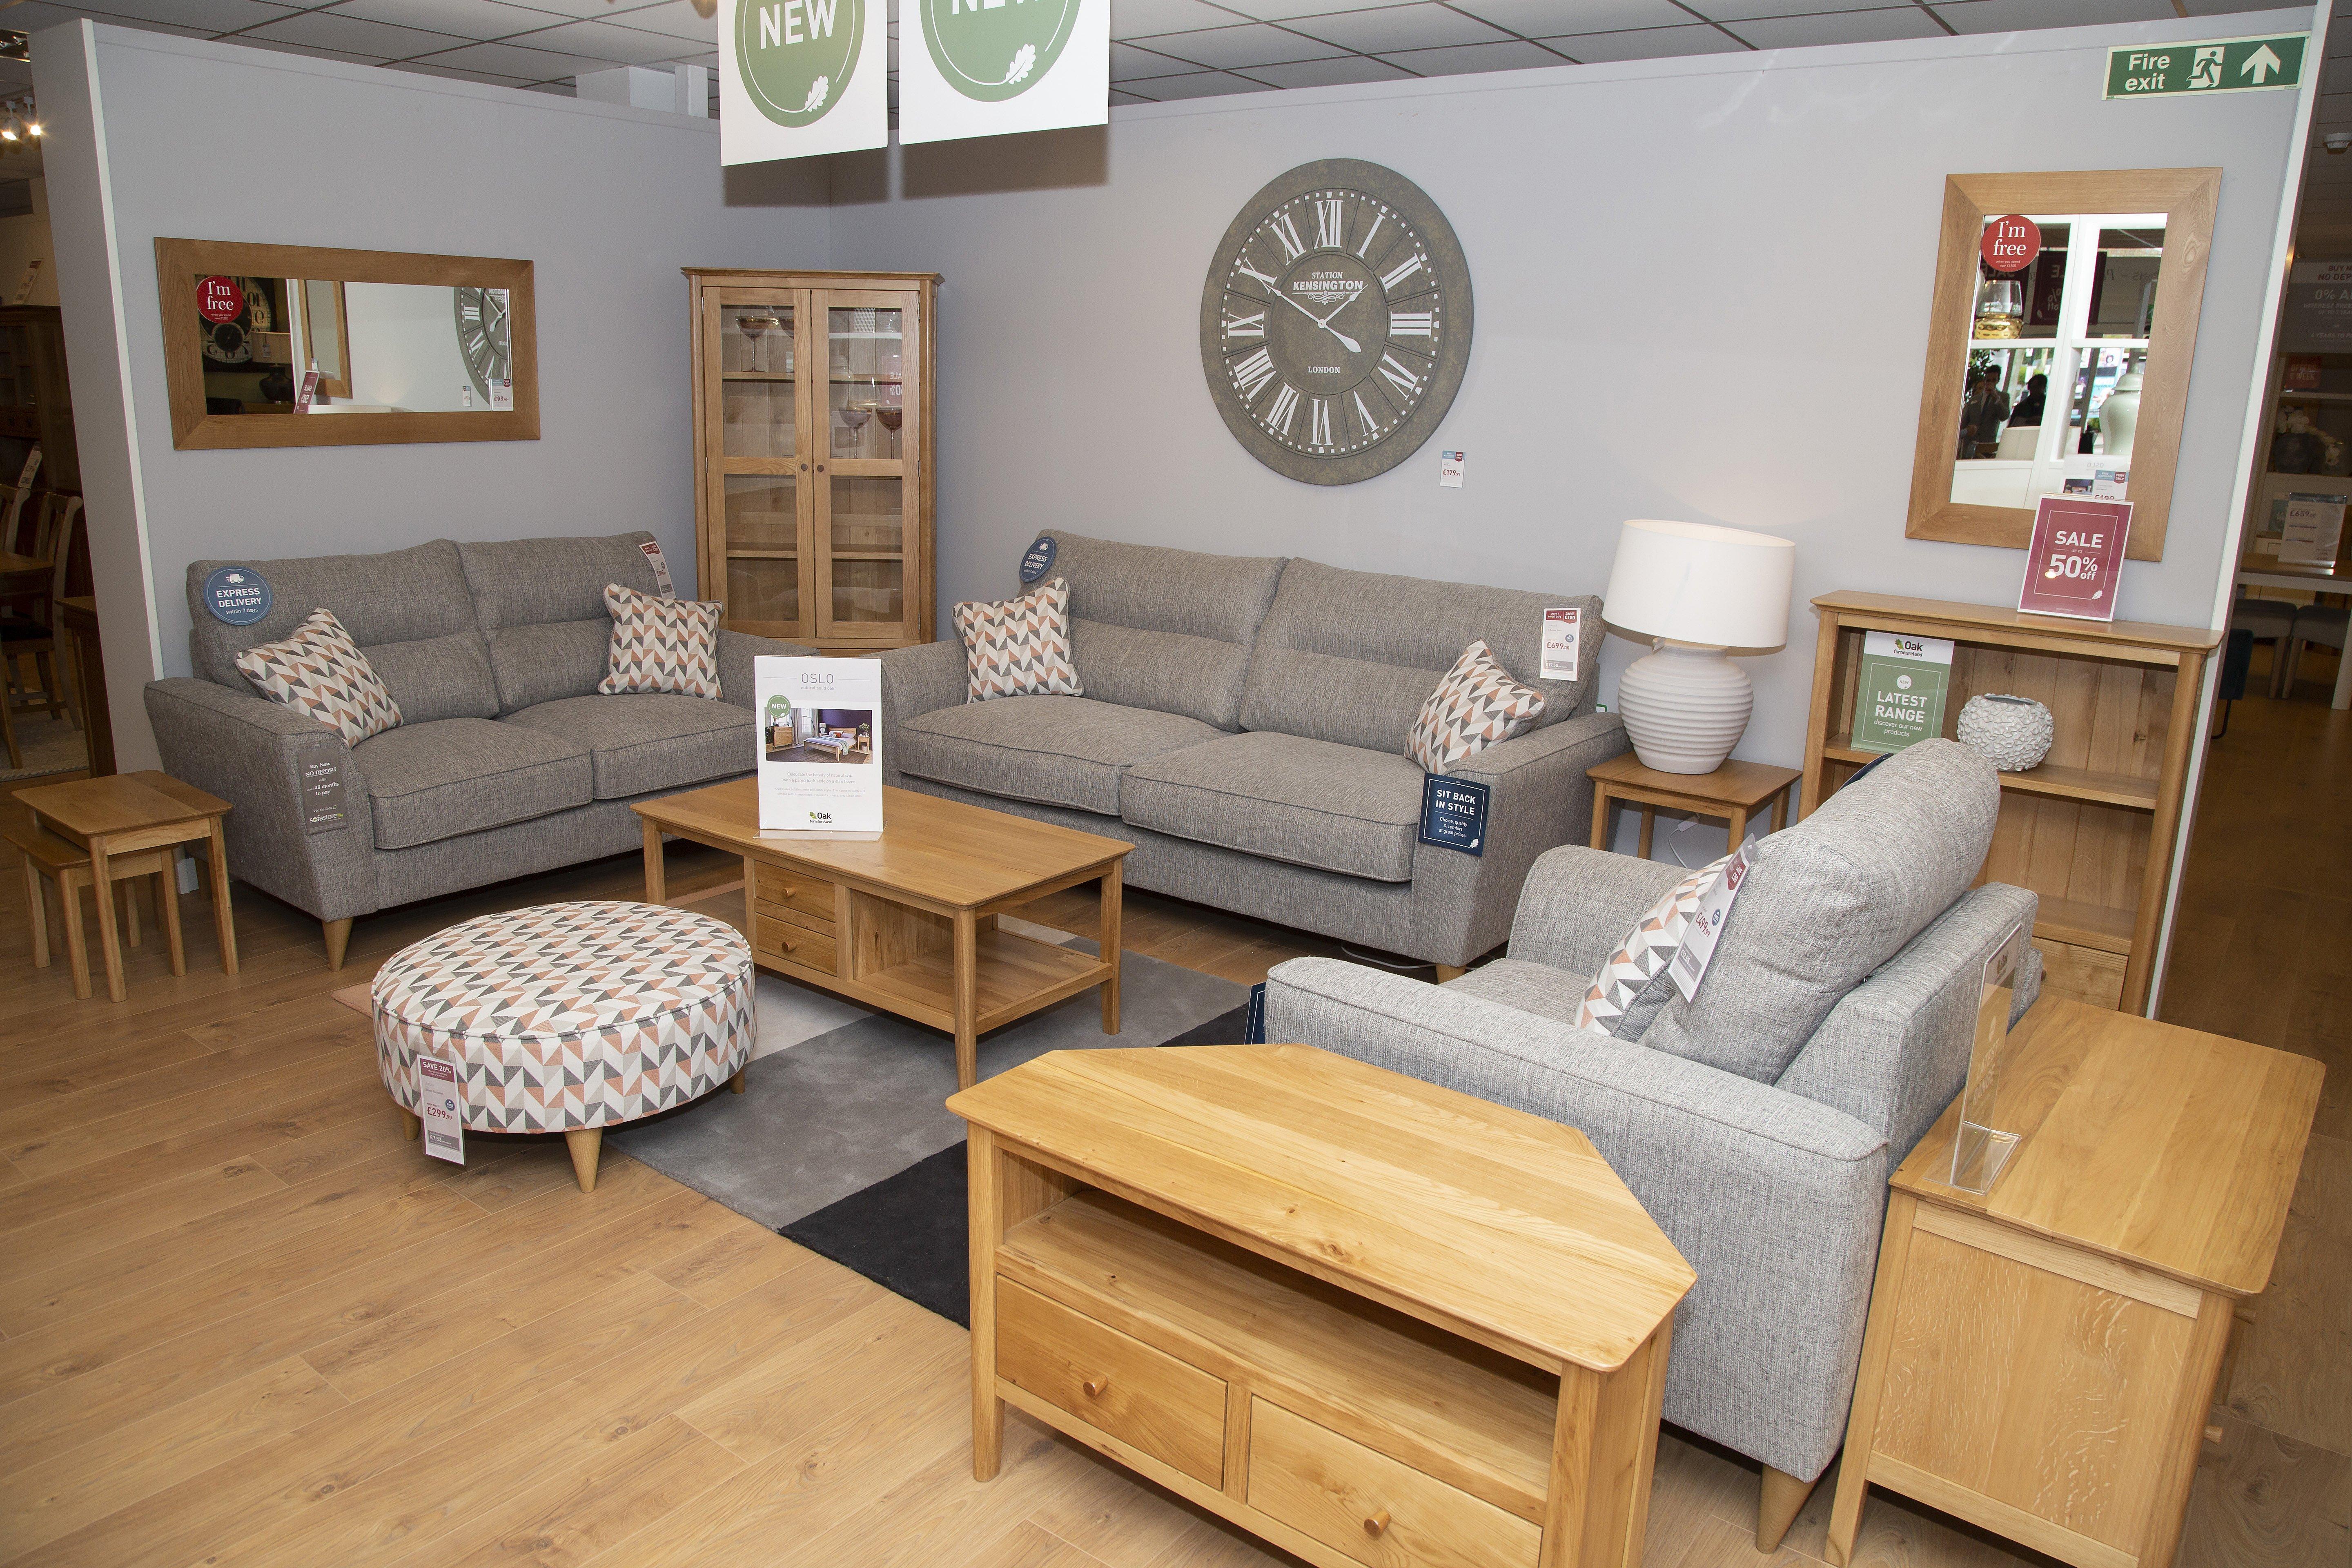 Oak Furnitureland Opens First Showroom In Doncaster And Creates